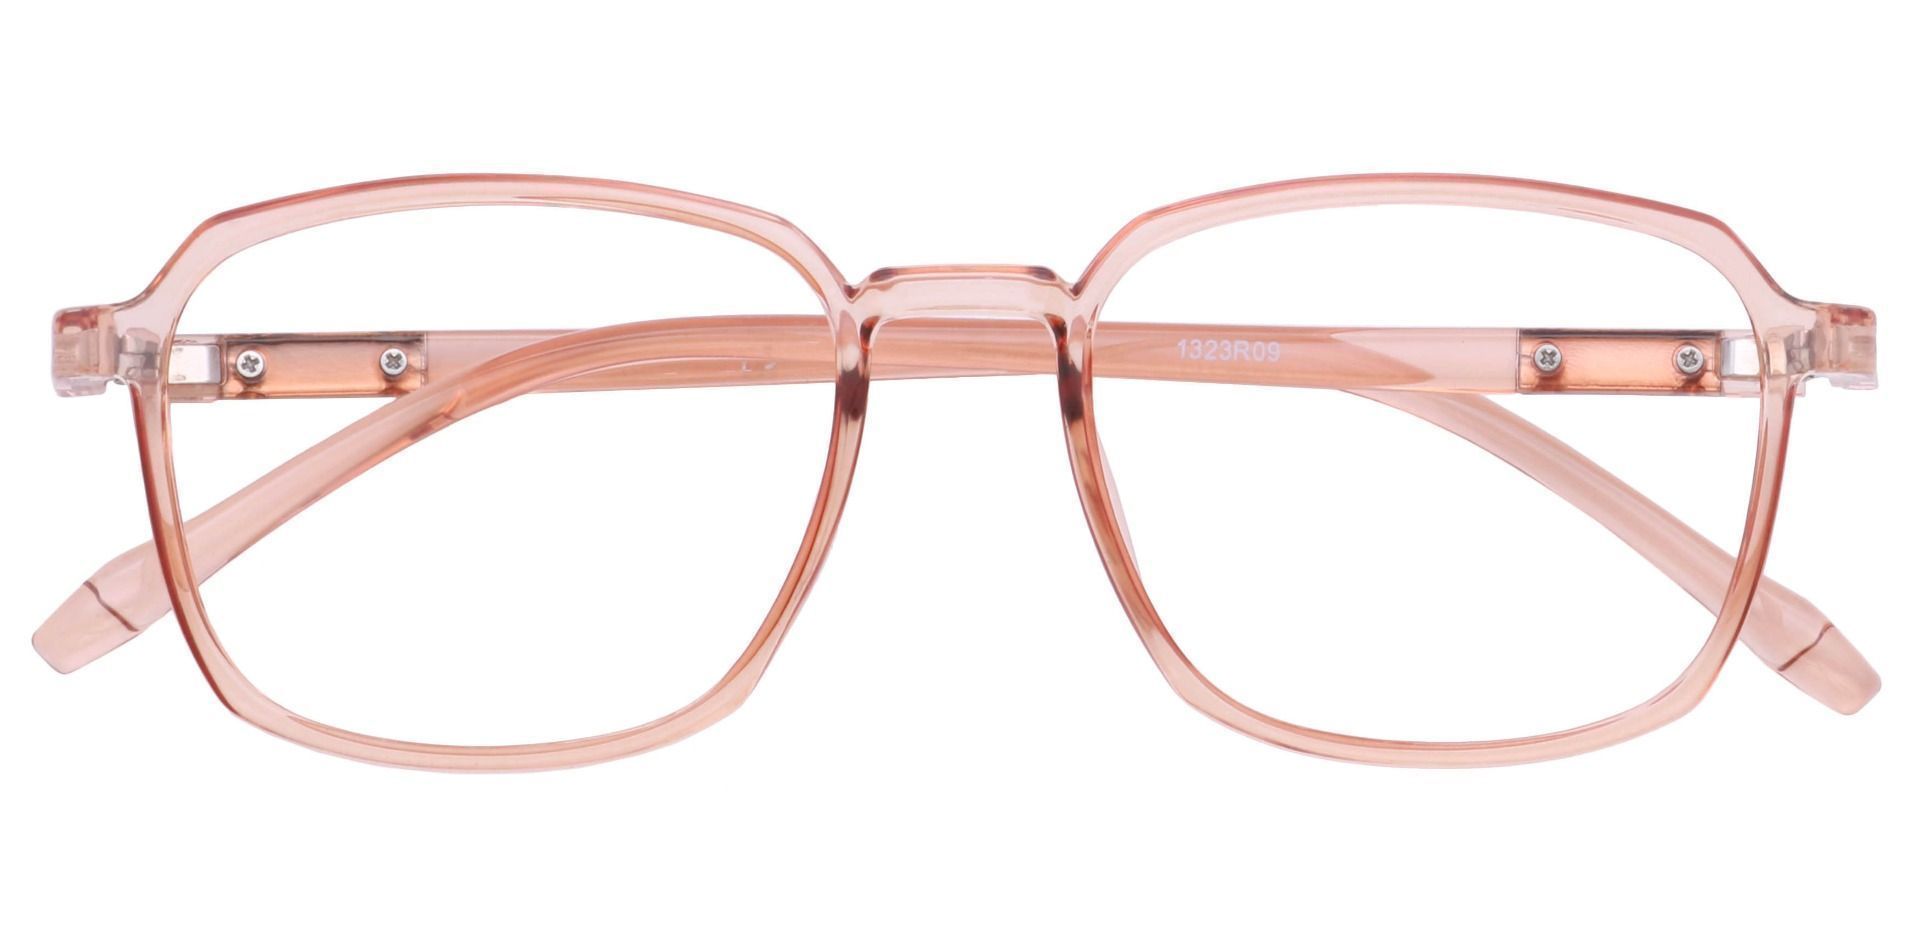 Stella Square Progressive Glasses - The Frame Is Red And Clear